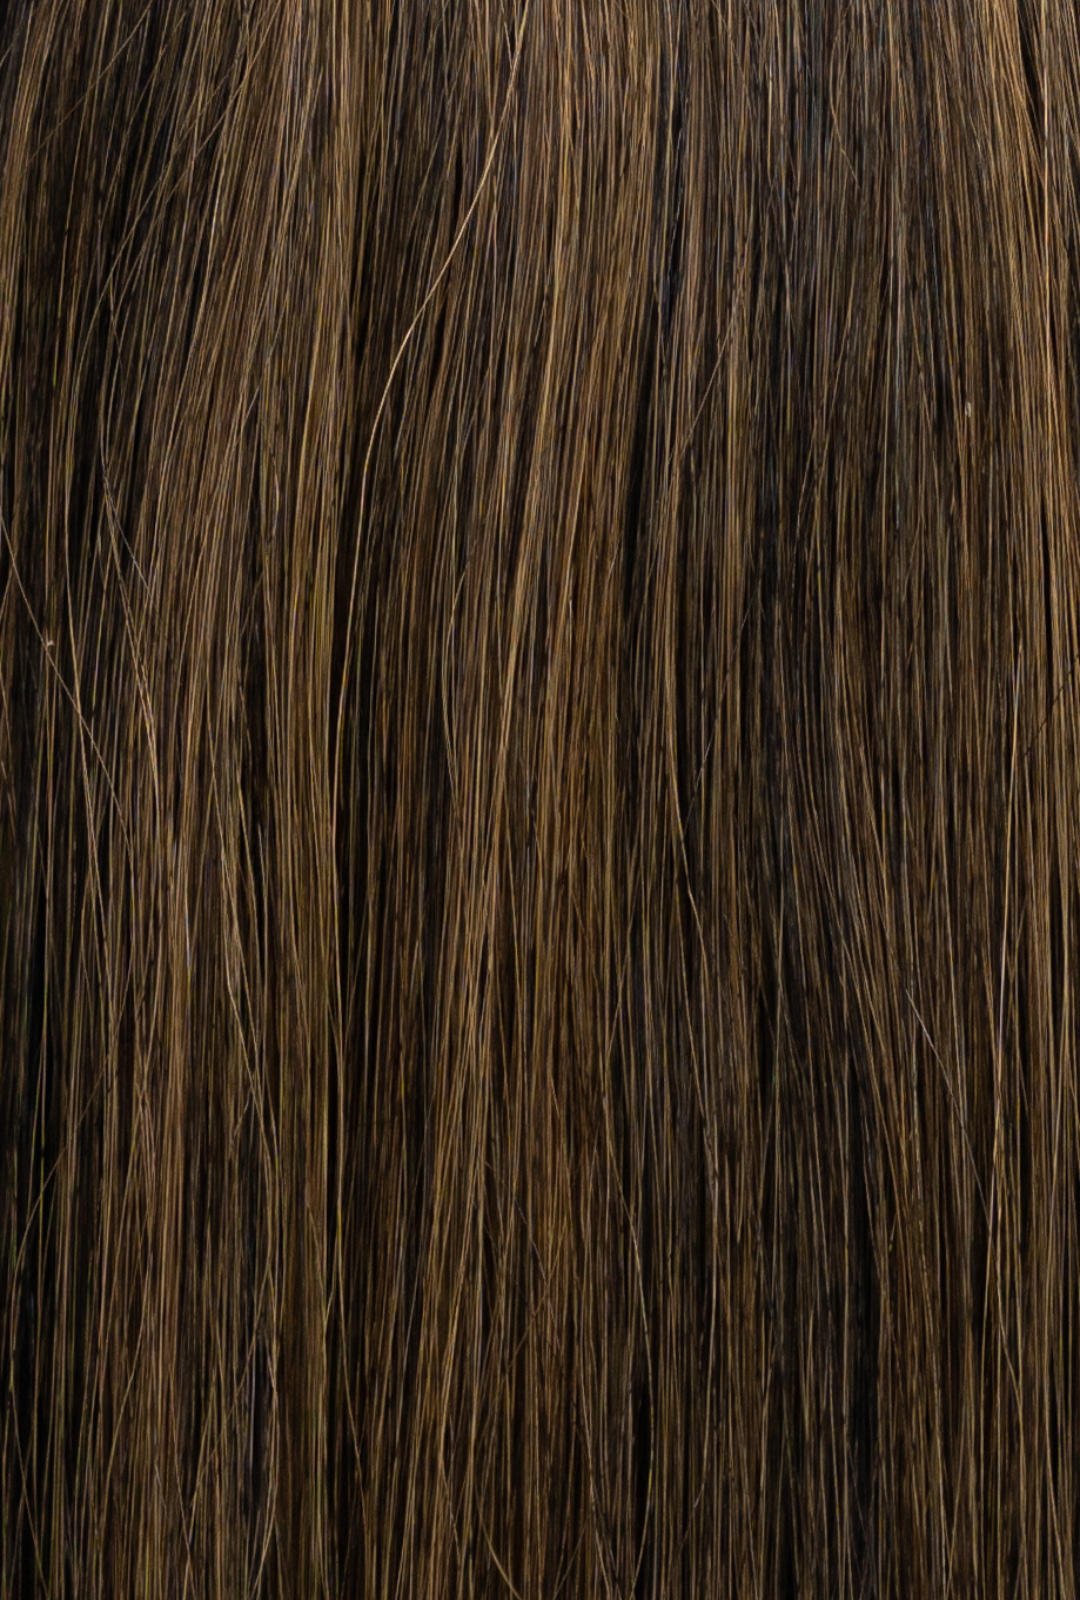 Halfsies Hand Tied Weft Extensions Dimensional #1B/5